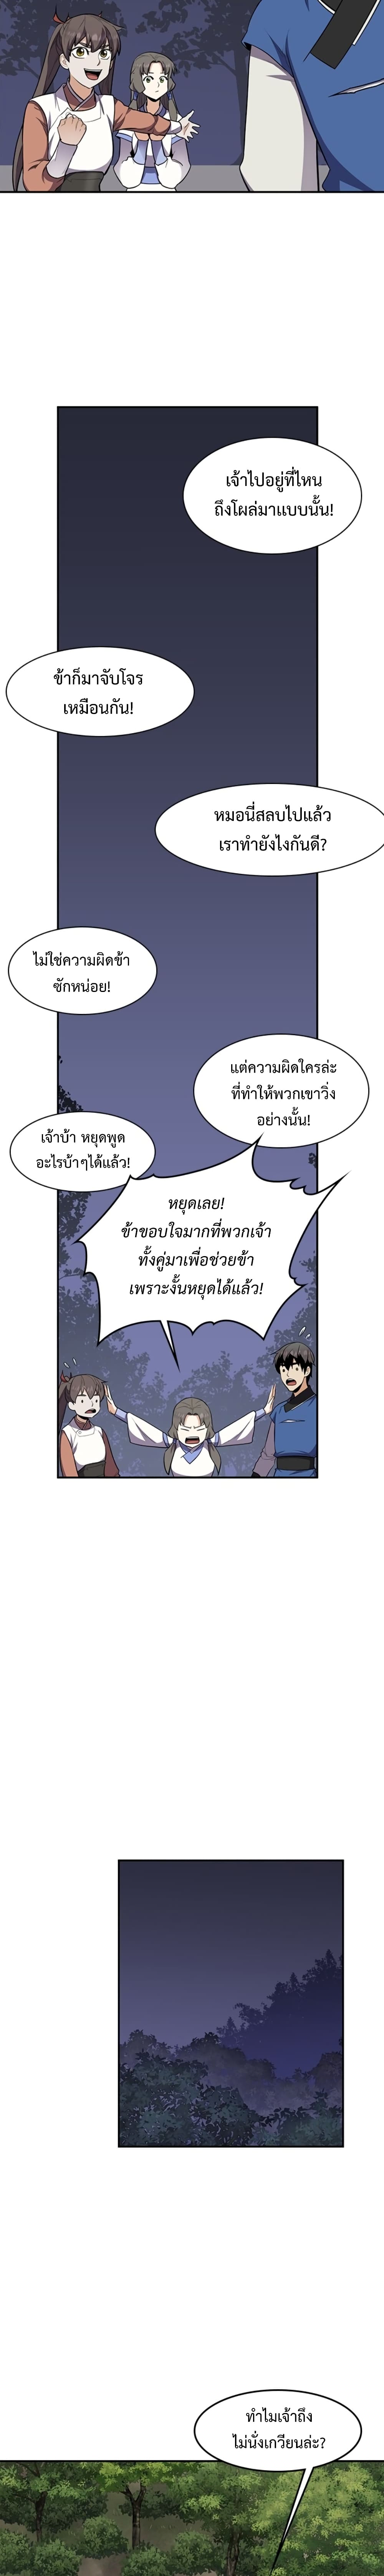 The Strongest Ever à¸à¸­à¸à¸à¸µà¹ 32 (17)